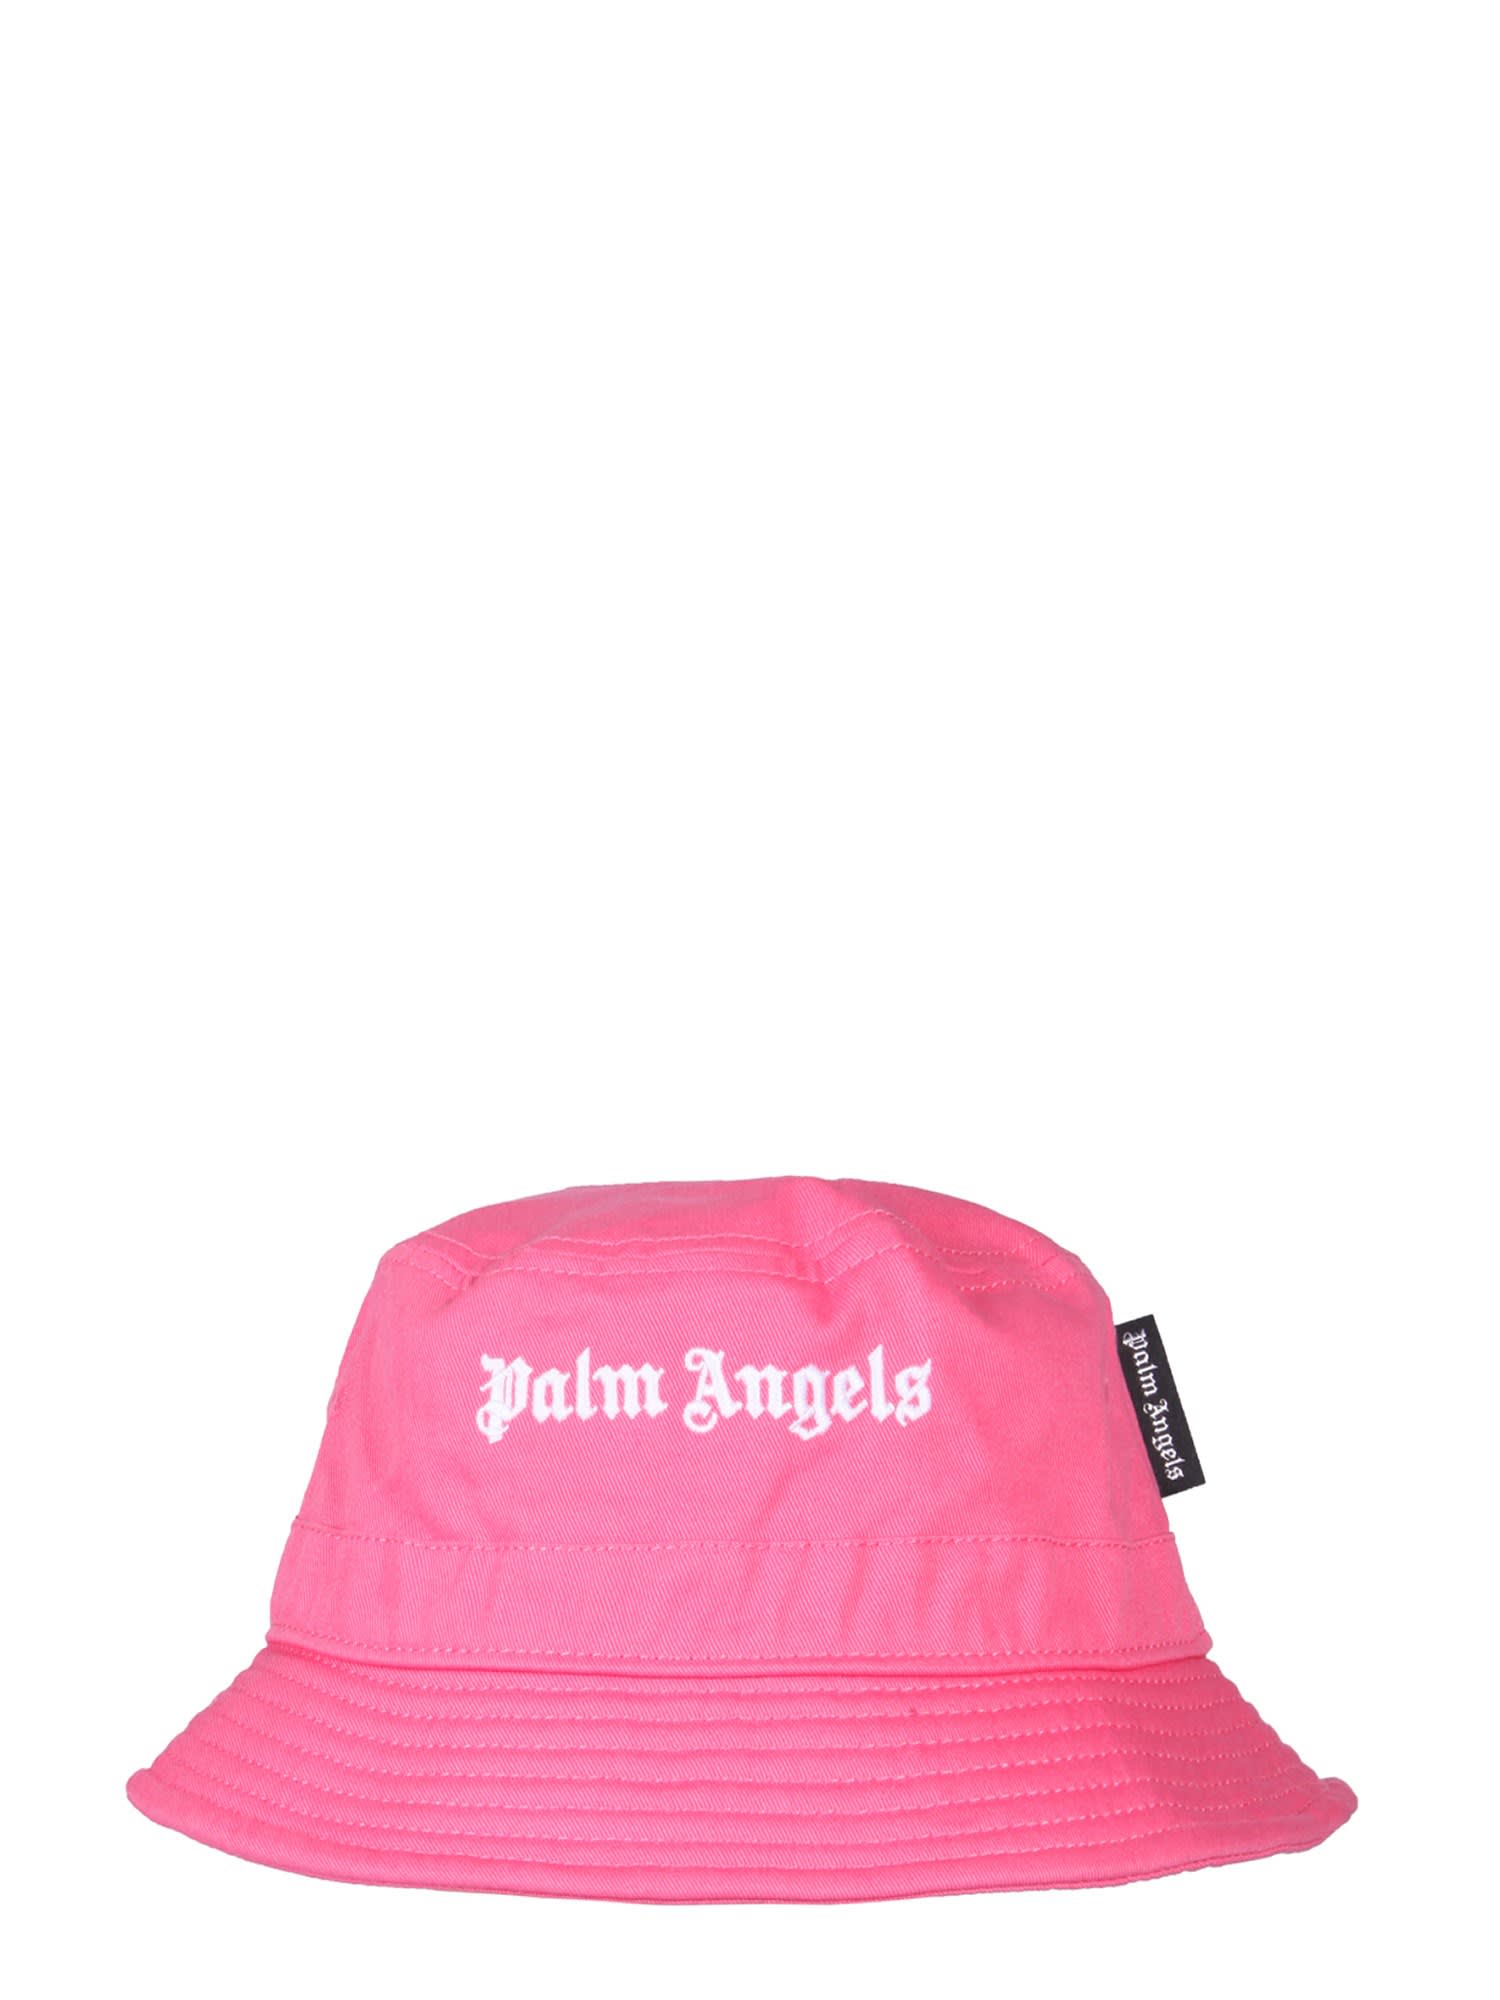 Palm Angels Embroidered Logo Bucket Hat